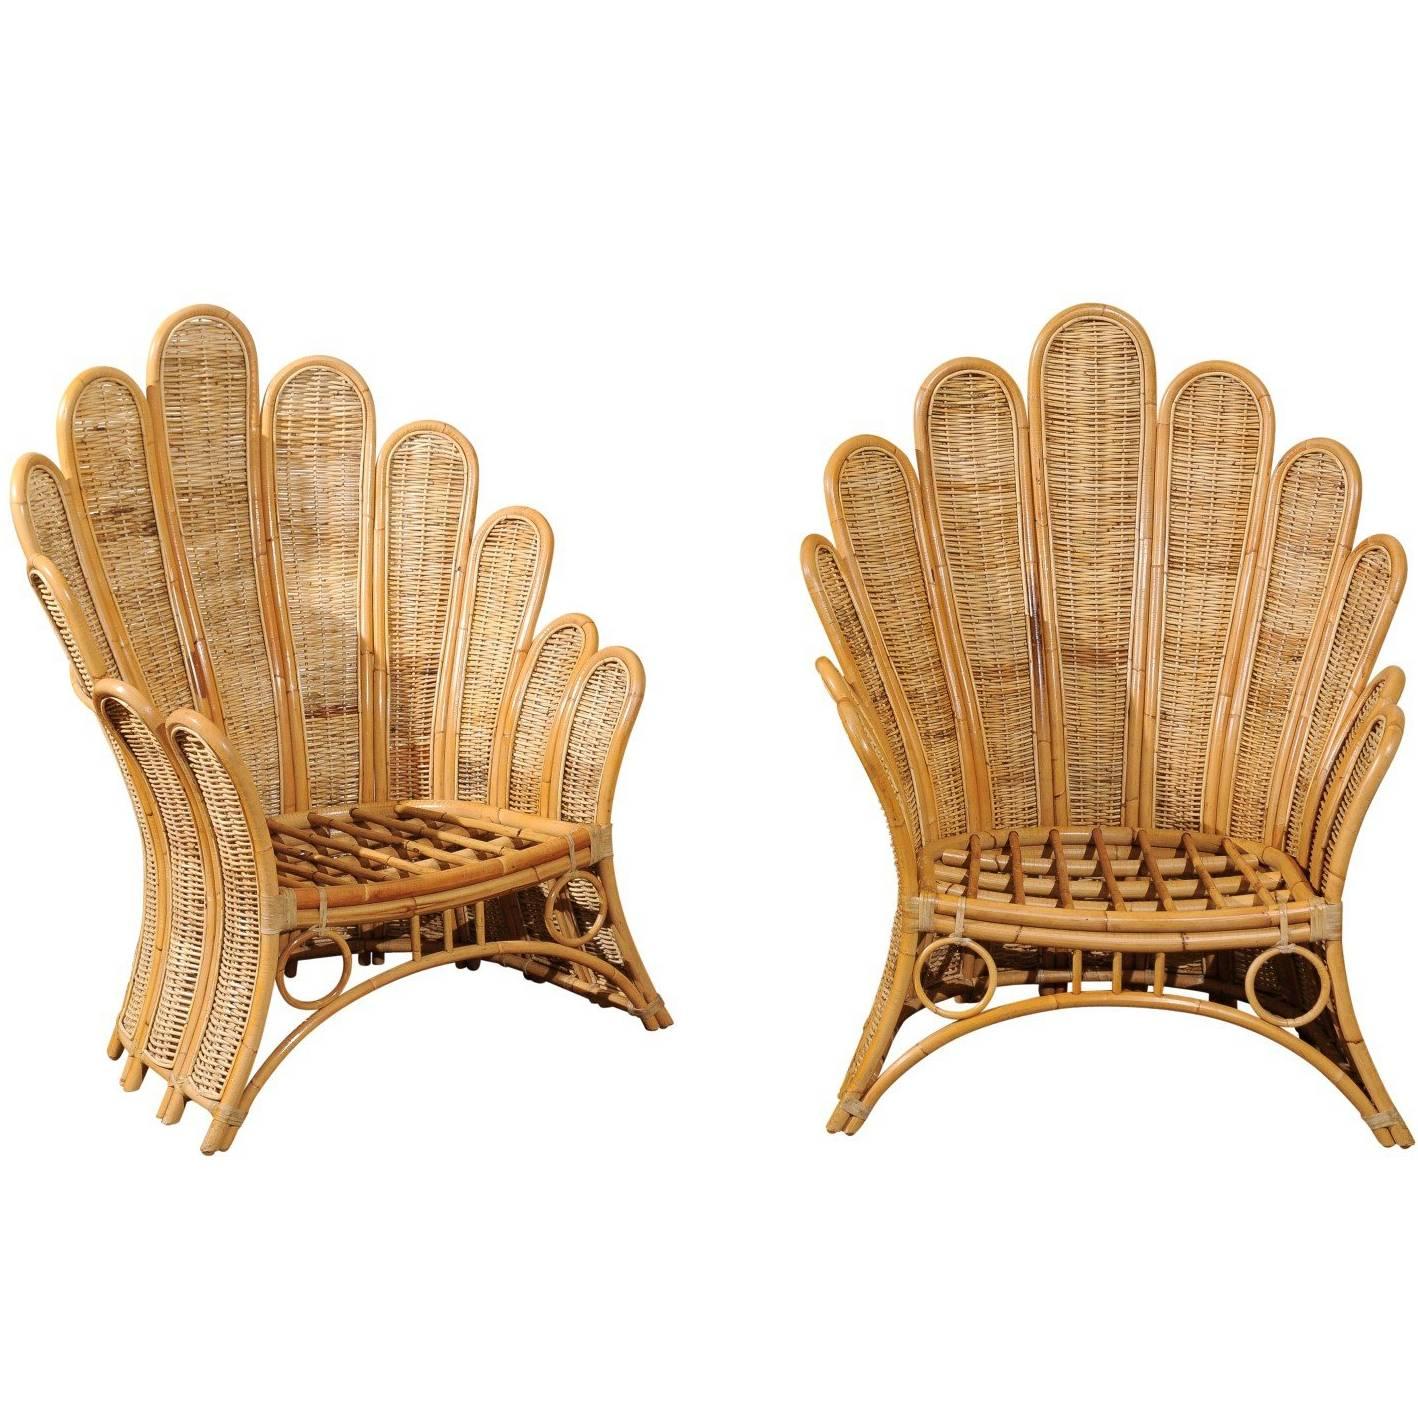 Majestic Restored Pair of Vintage Rattan and Wicker Palm Frond Club Chairs